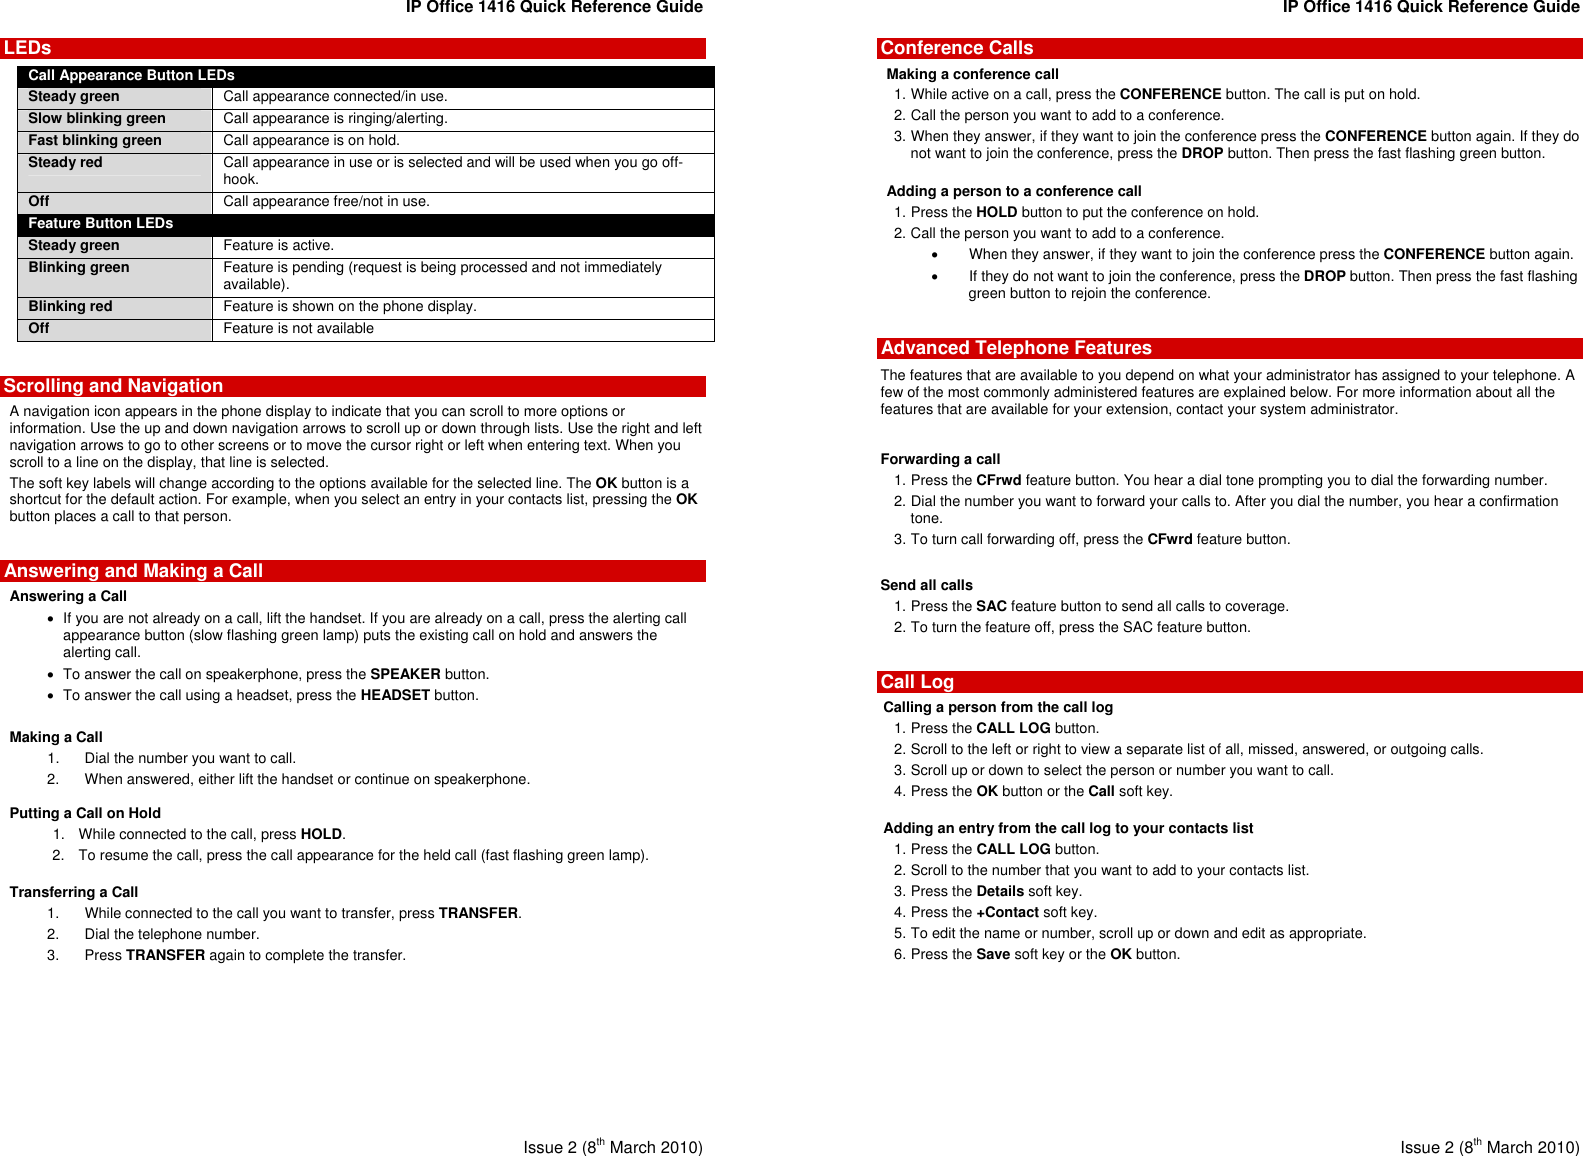 Avaya Ip Office 1416 Quick Reference Guide 1616